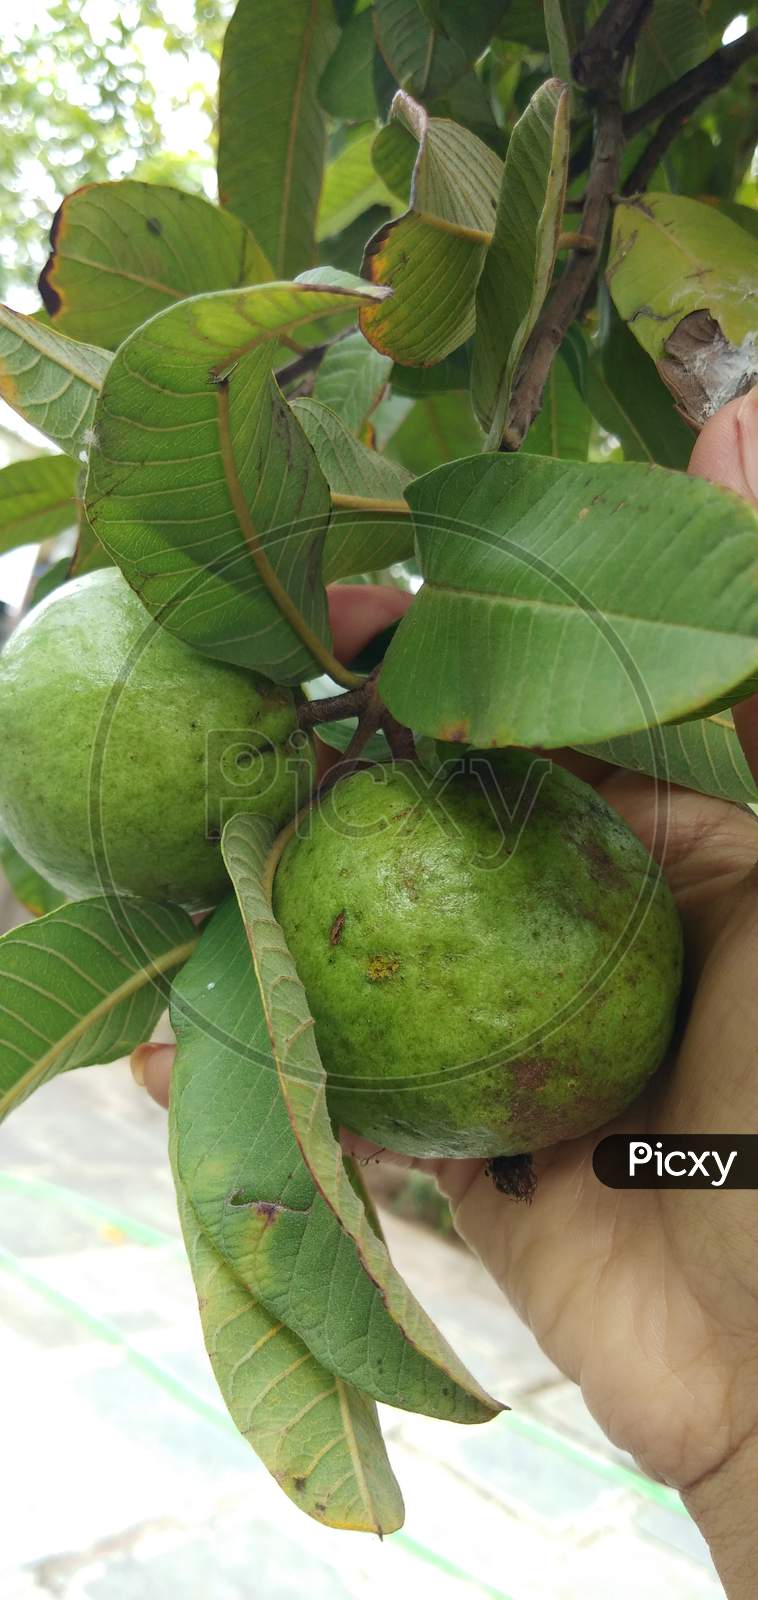 Guava fruits with leaves